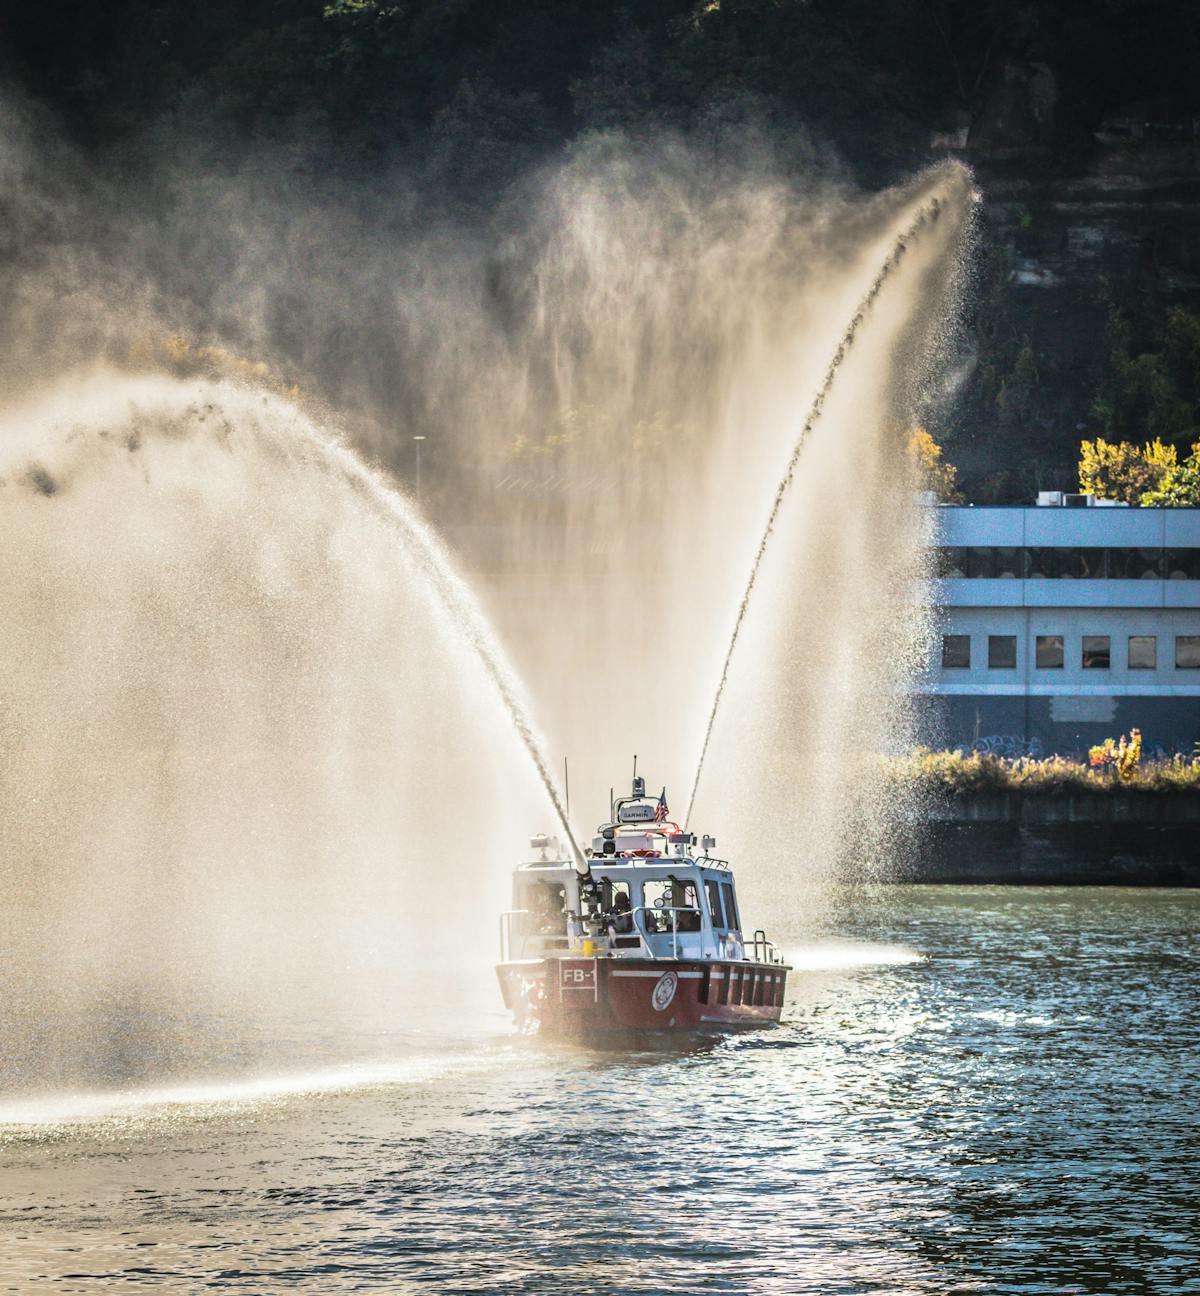 The Pittsburgh Bureau of Fire&rsquo;s Lake Assault deep V-hull fireboat features a compact Hale 80FC pump flowing up to 3,000 gpm that is powered by a dedicated 6.6L Duramax V-8 diesel engine. The fire pump includes a 6-inch main discharge that feeds a number of outlets, including bow- and stern-mounted TFT Hurricane monitors, each capable of flowing 1,250 gpm.